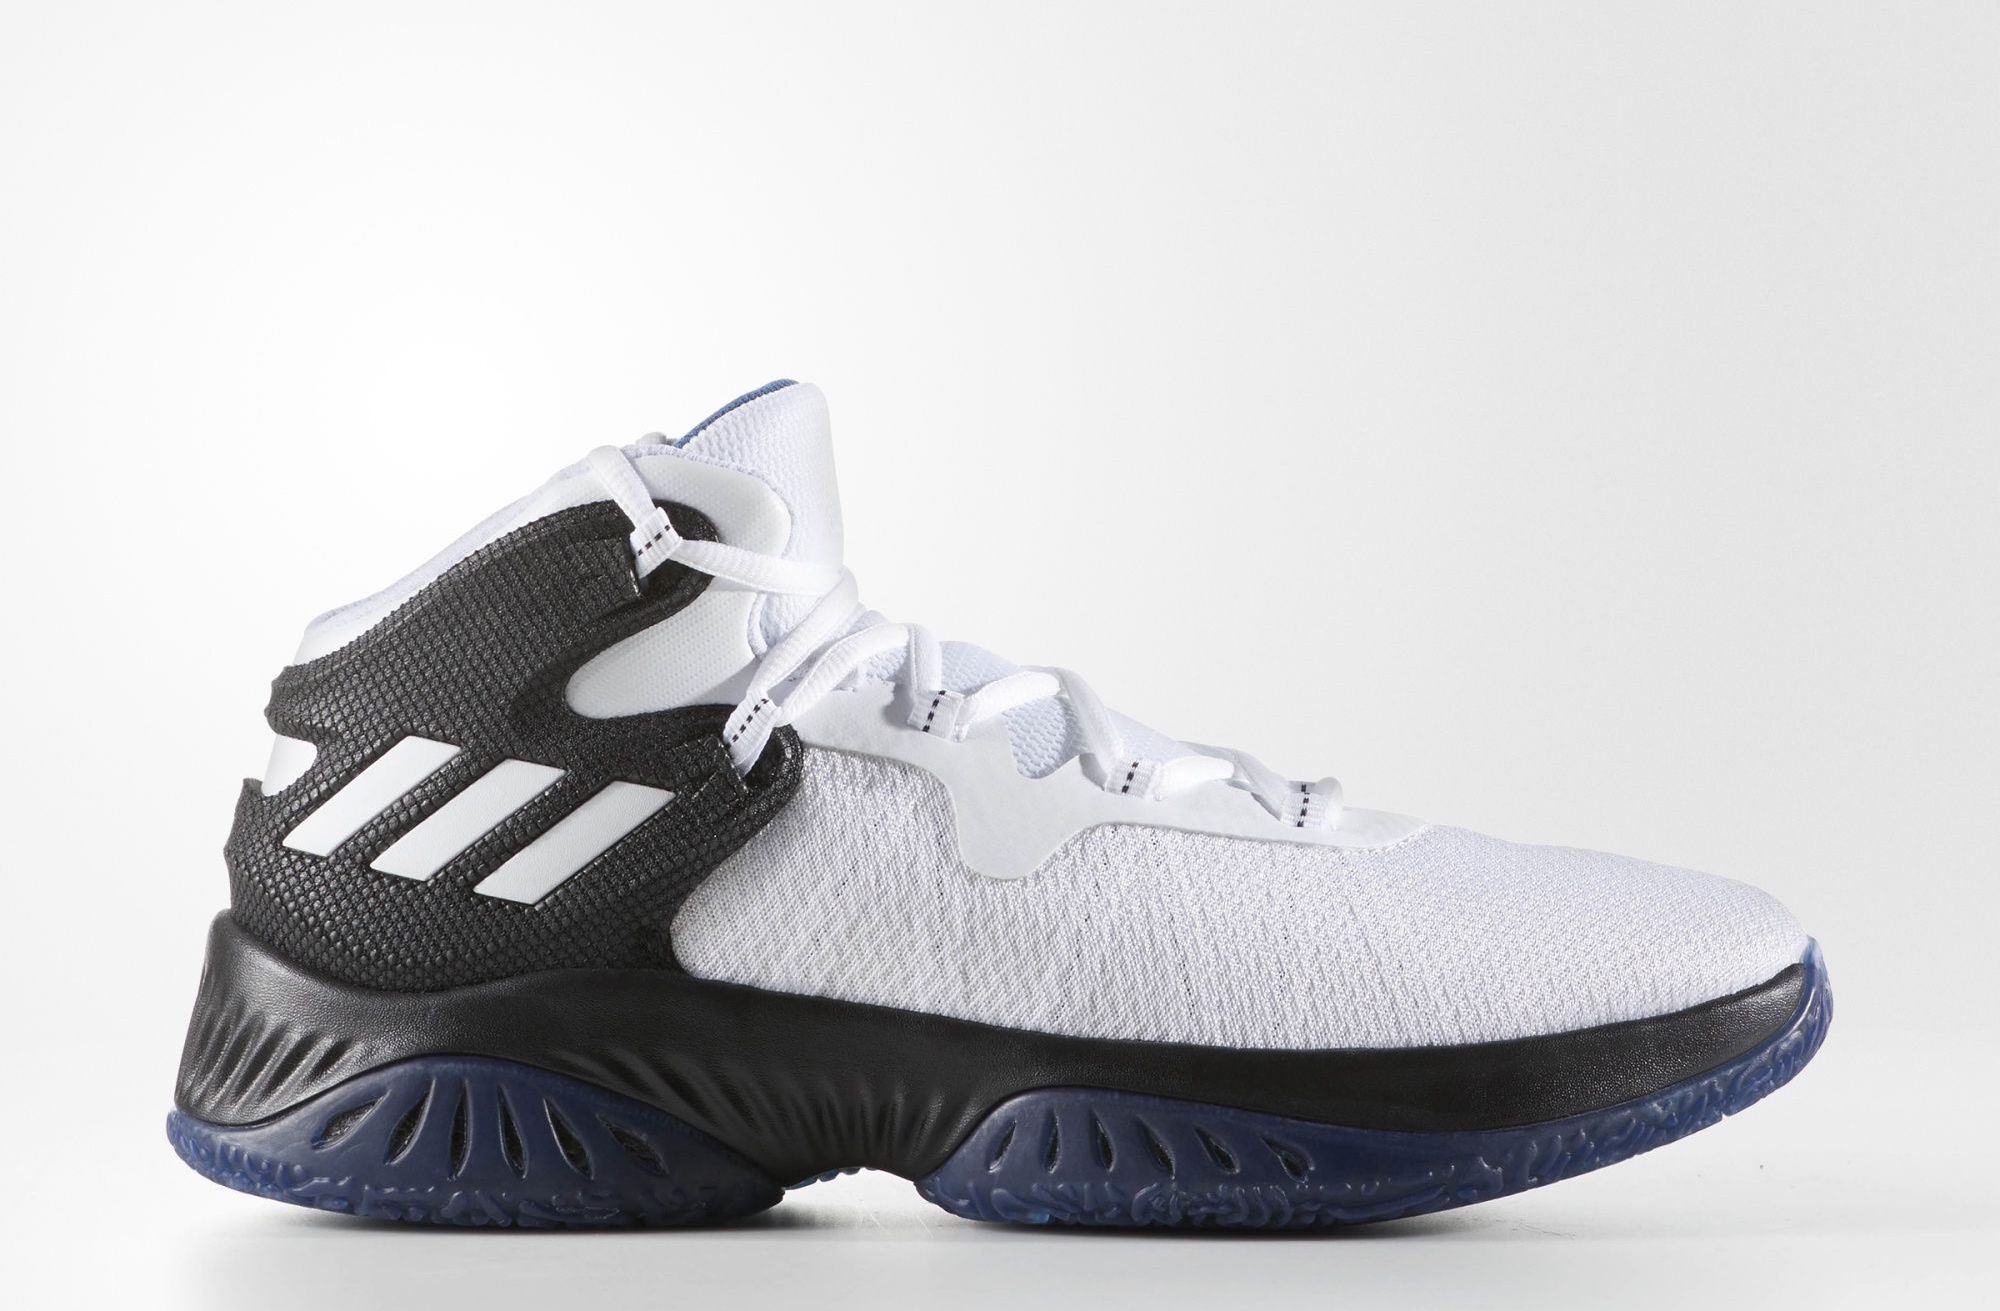 adidas Debuts a New Crazy Explosive Bounce - WearTesters